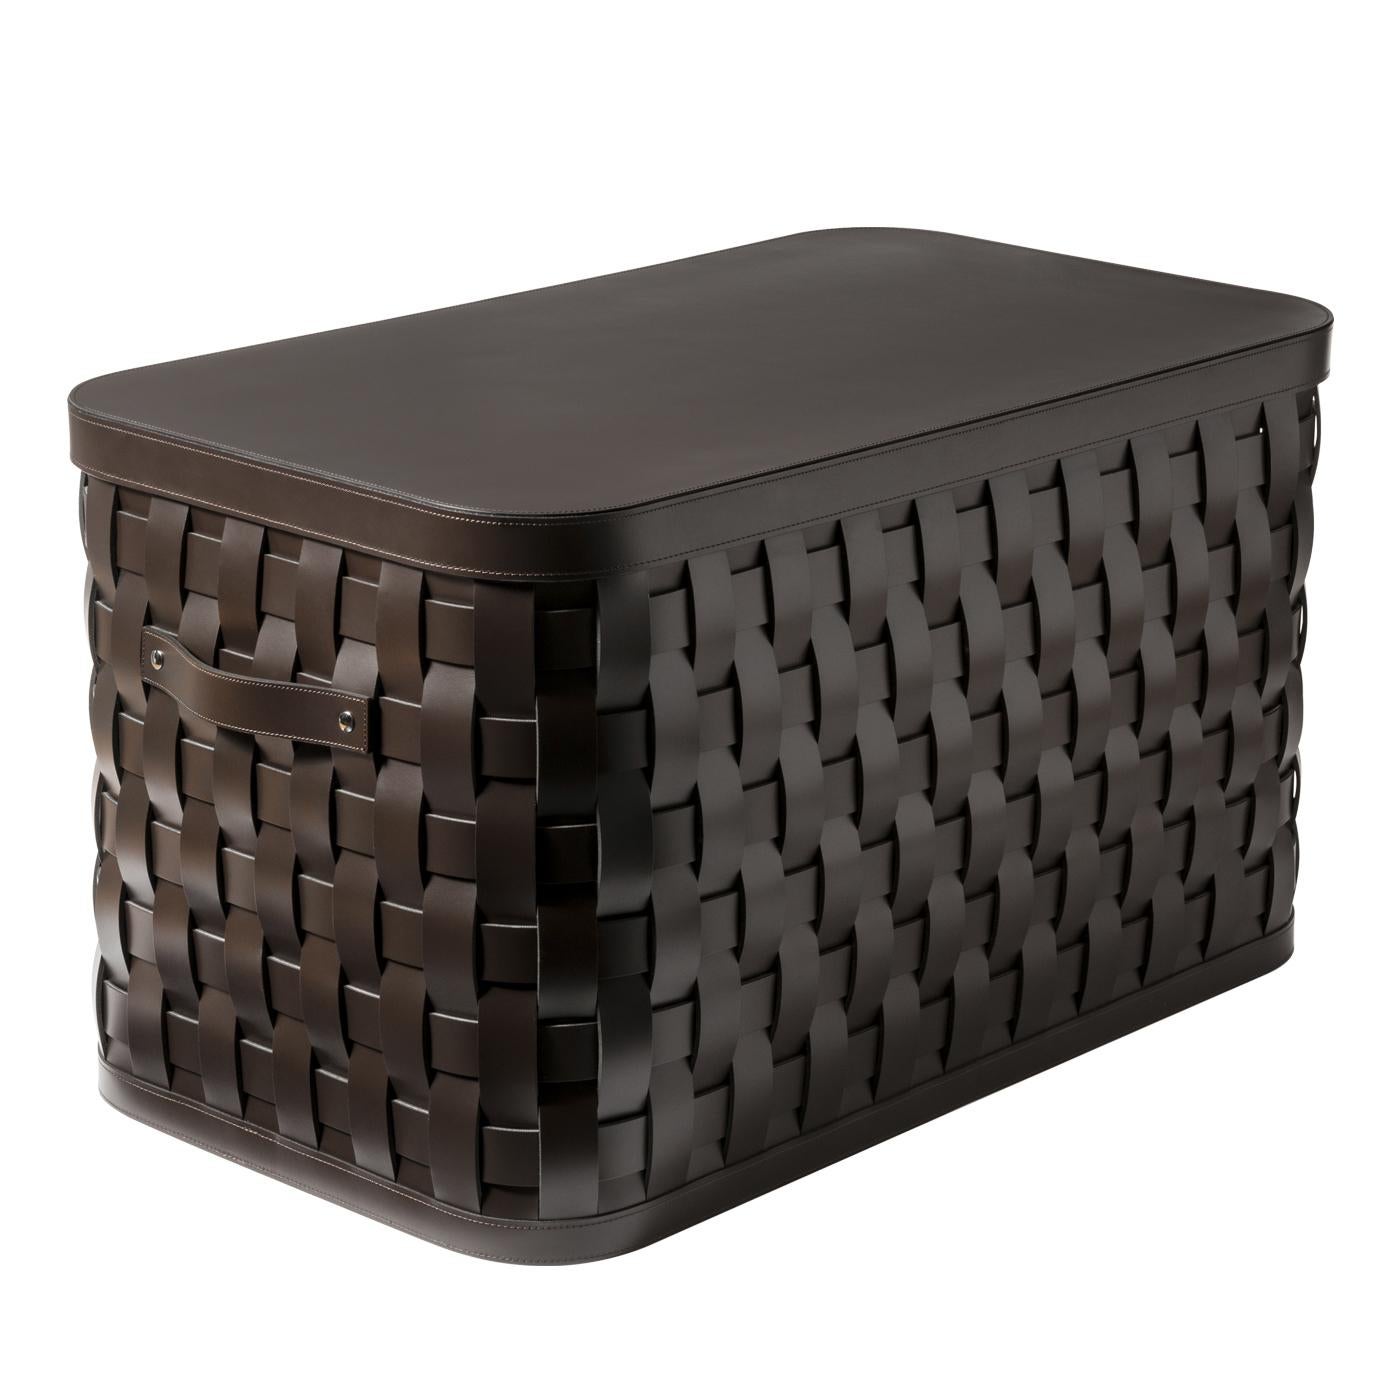 Part of the Demetra series, this tall basket is made of high quality, durable, eco-friendly handwoven leather and features a lid of the same color. This versatile basket offers an elegant solution to all the storage needs around the house: in the